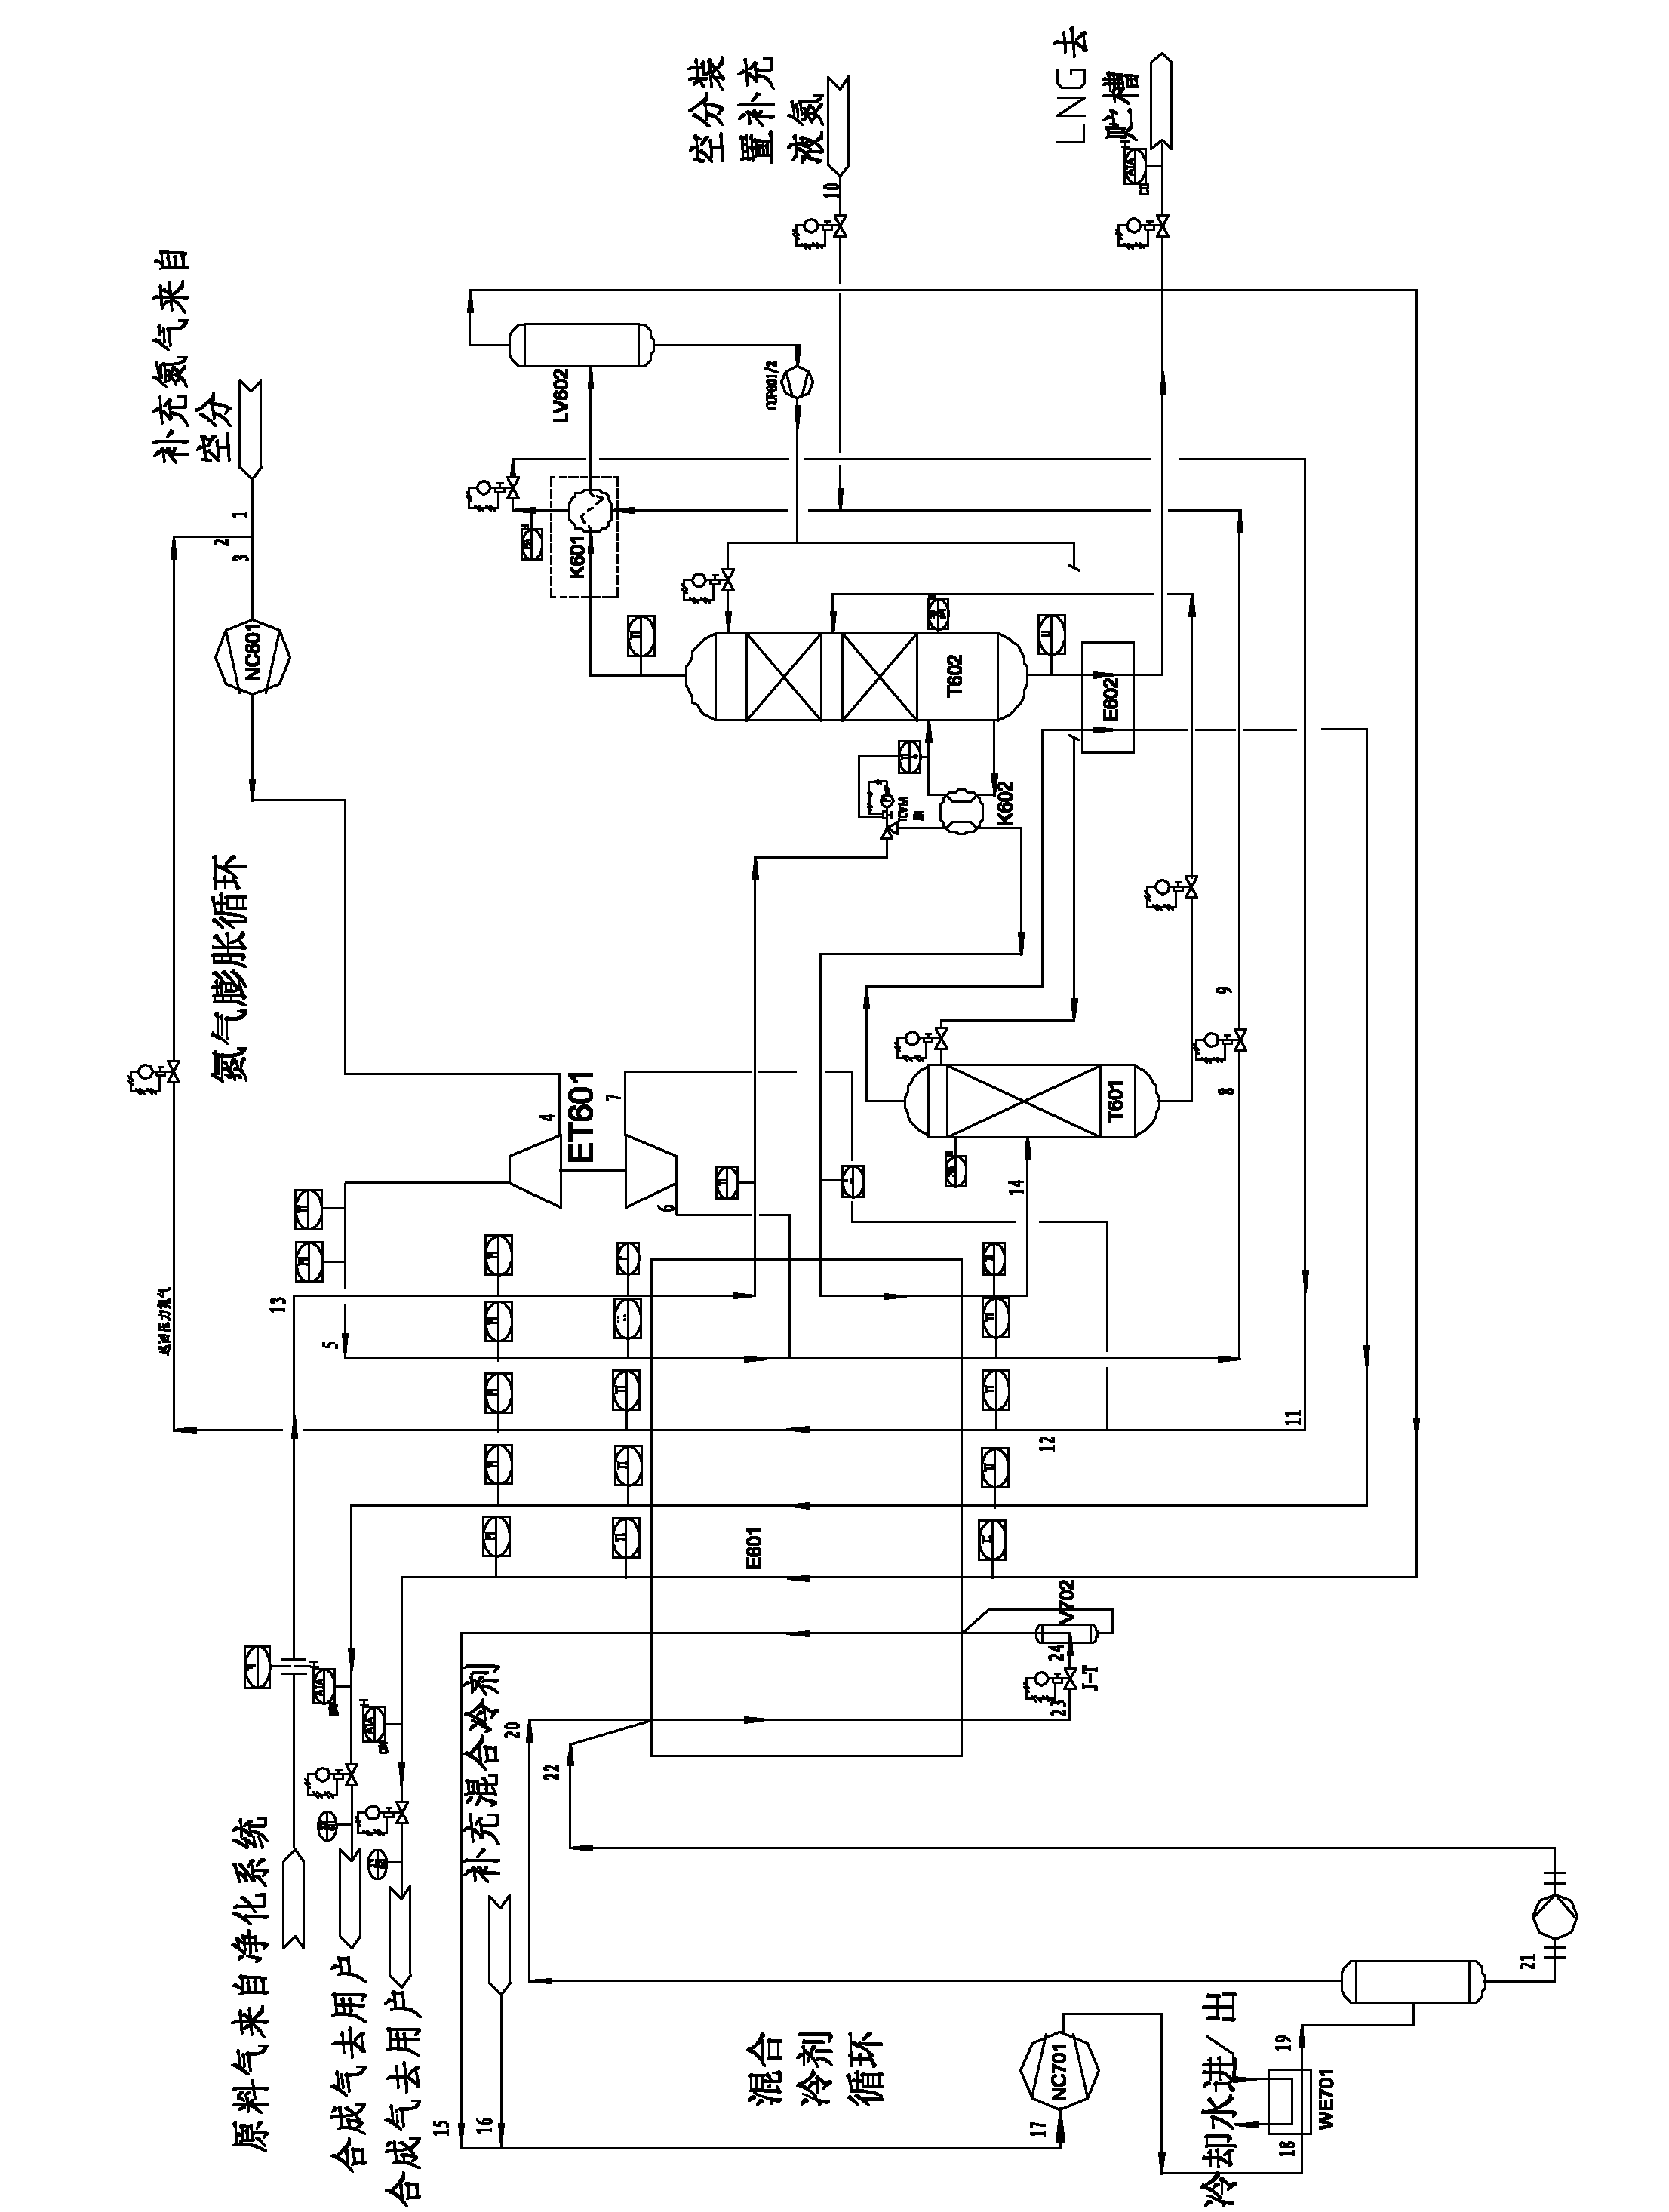 Heat exchange system for cryogenic separation device for coal gasification device feed gas methane